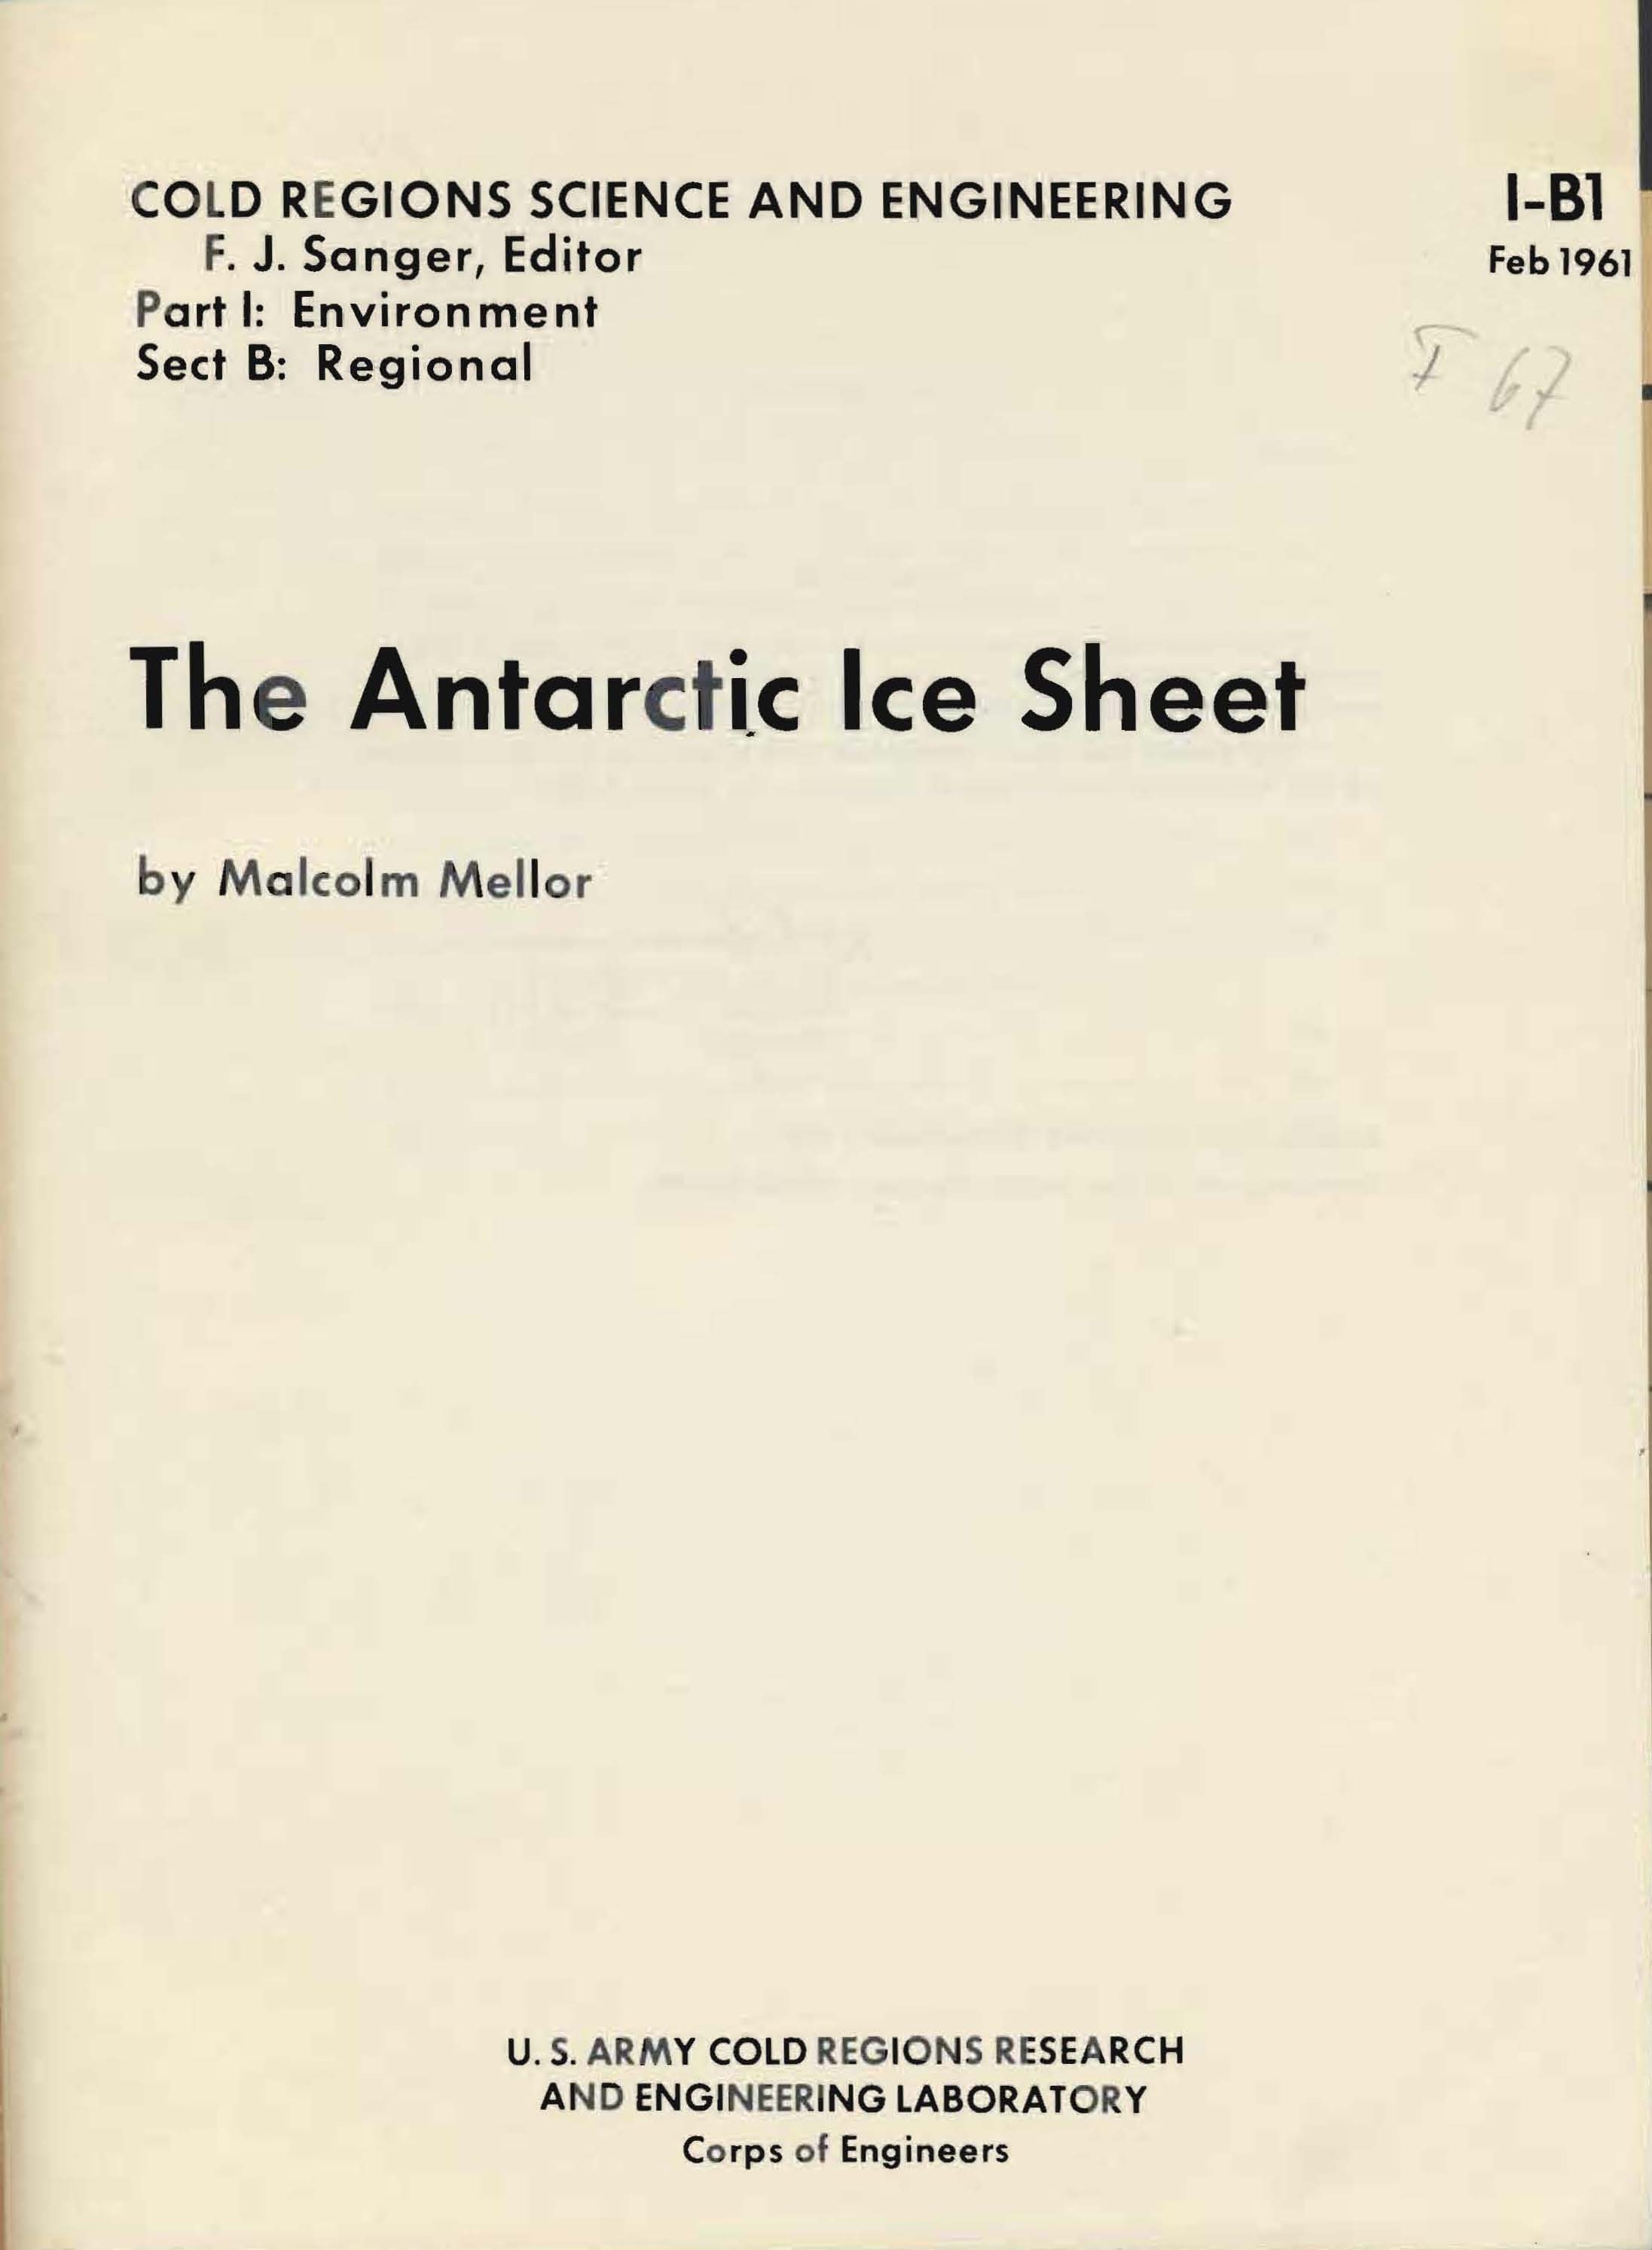 The Antartic Ice Sheet